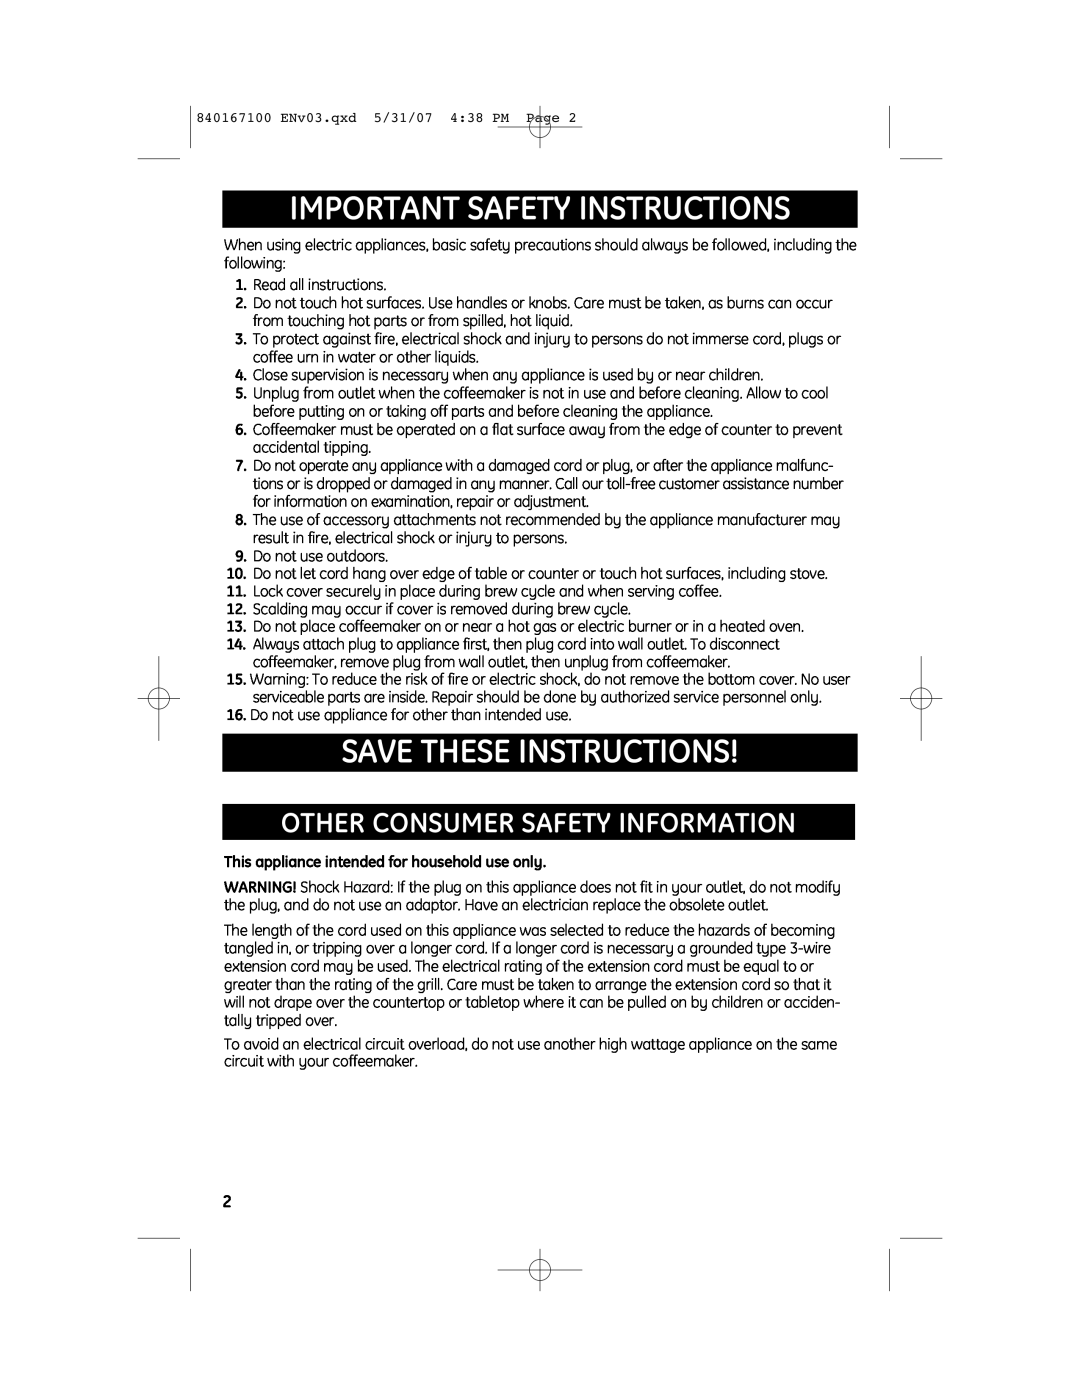 GE 840167100, 169161 manual Other Consumer Safety Information, Important Safety Instructions, Save These Instructions 